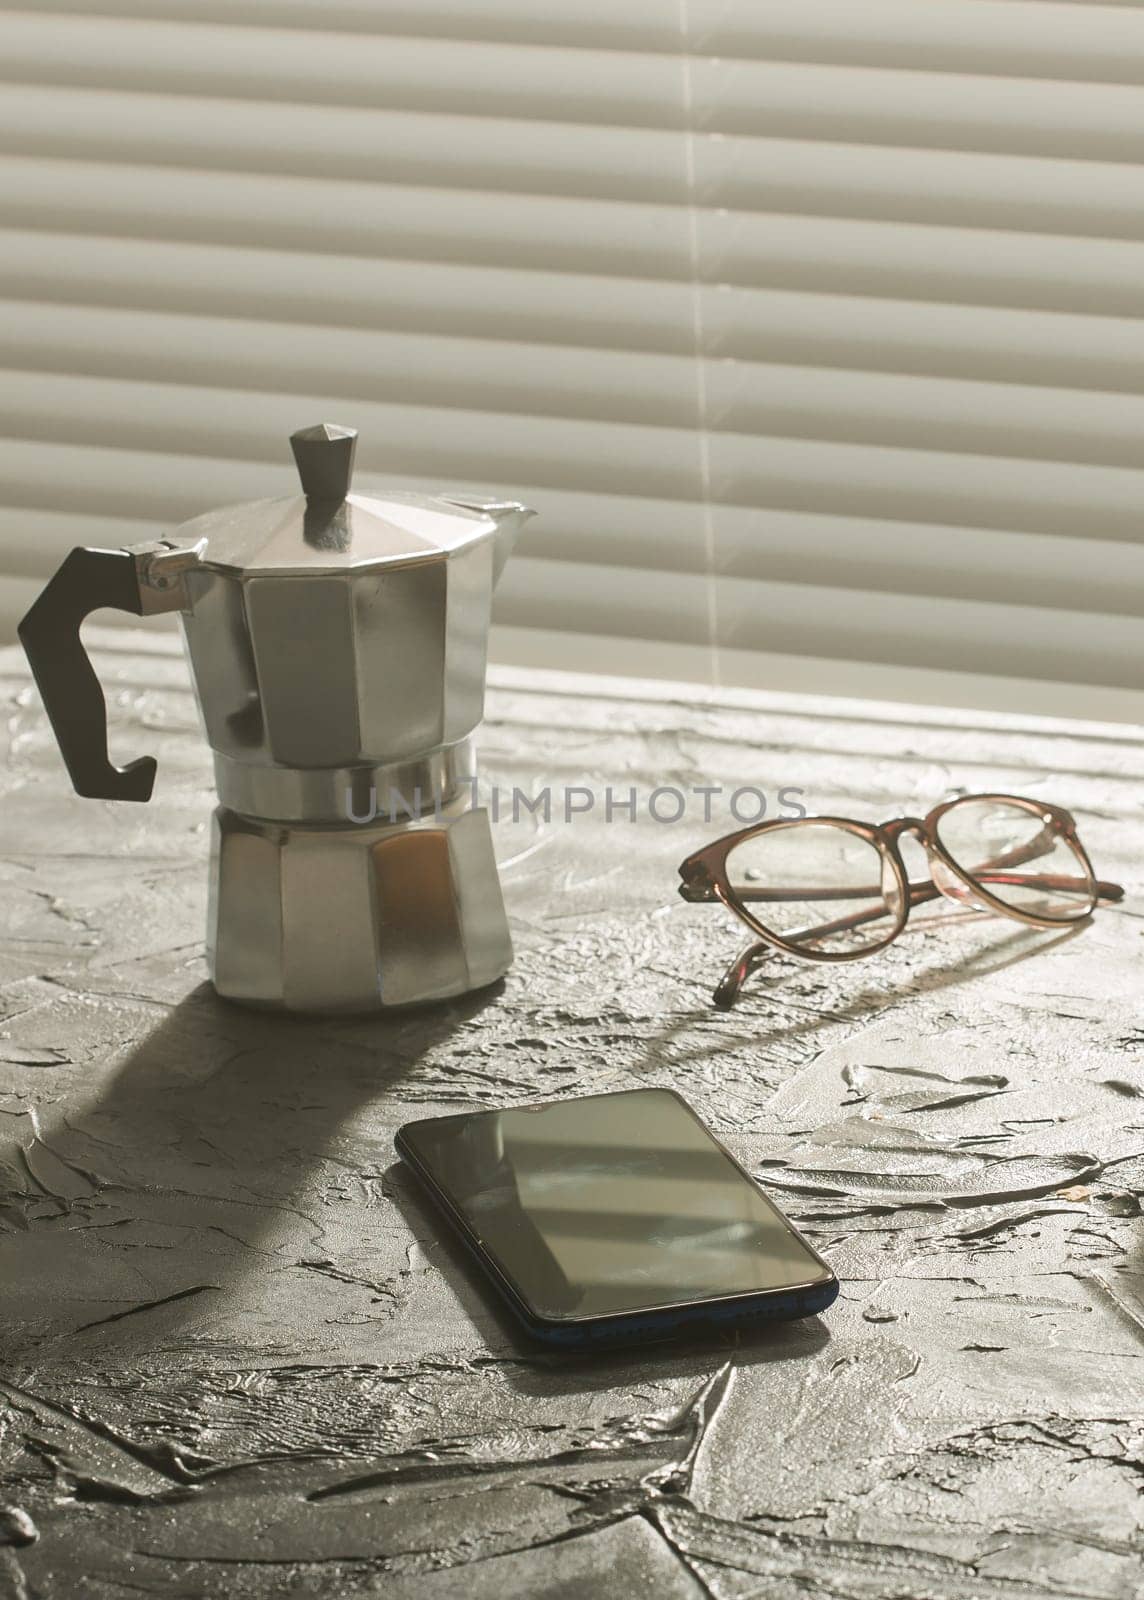 Breakfast with coffee moka pot and smartphone and eyeglasses. Morning meal and breakfast concept. by Satura86